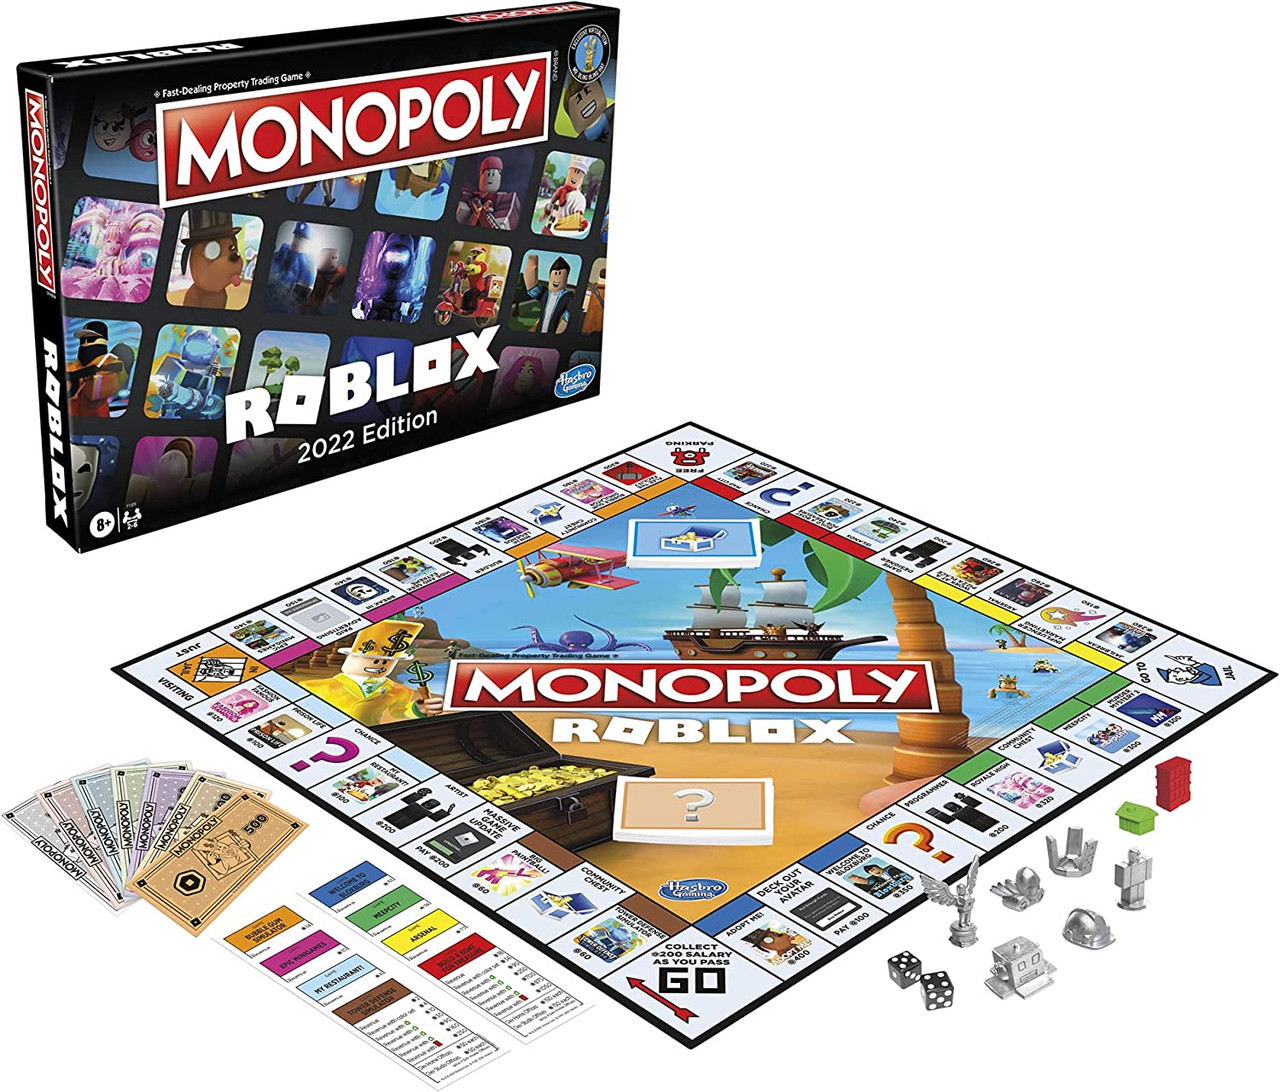 Monopoly: Roblox 2022 Edition Board Game, Buy, Sell, Trade Popular Roblox  Experiences [Includes Exclusive Virtual Item Code], F1325, AYOUB  COMPUTERS